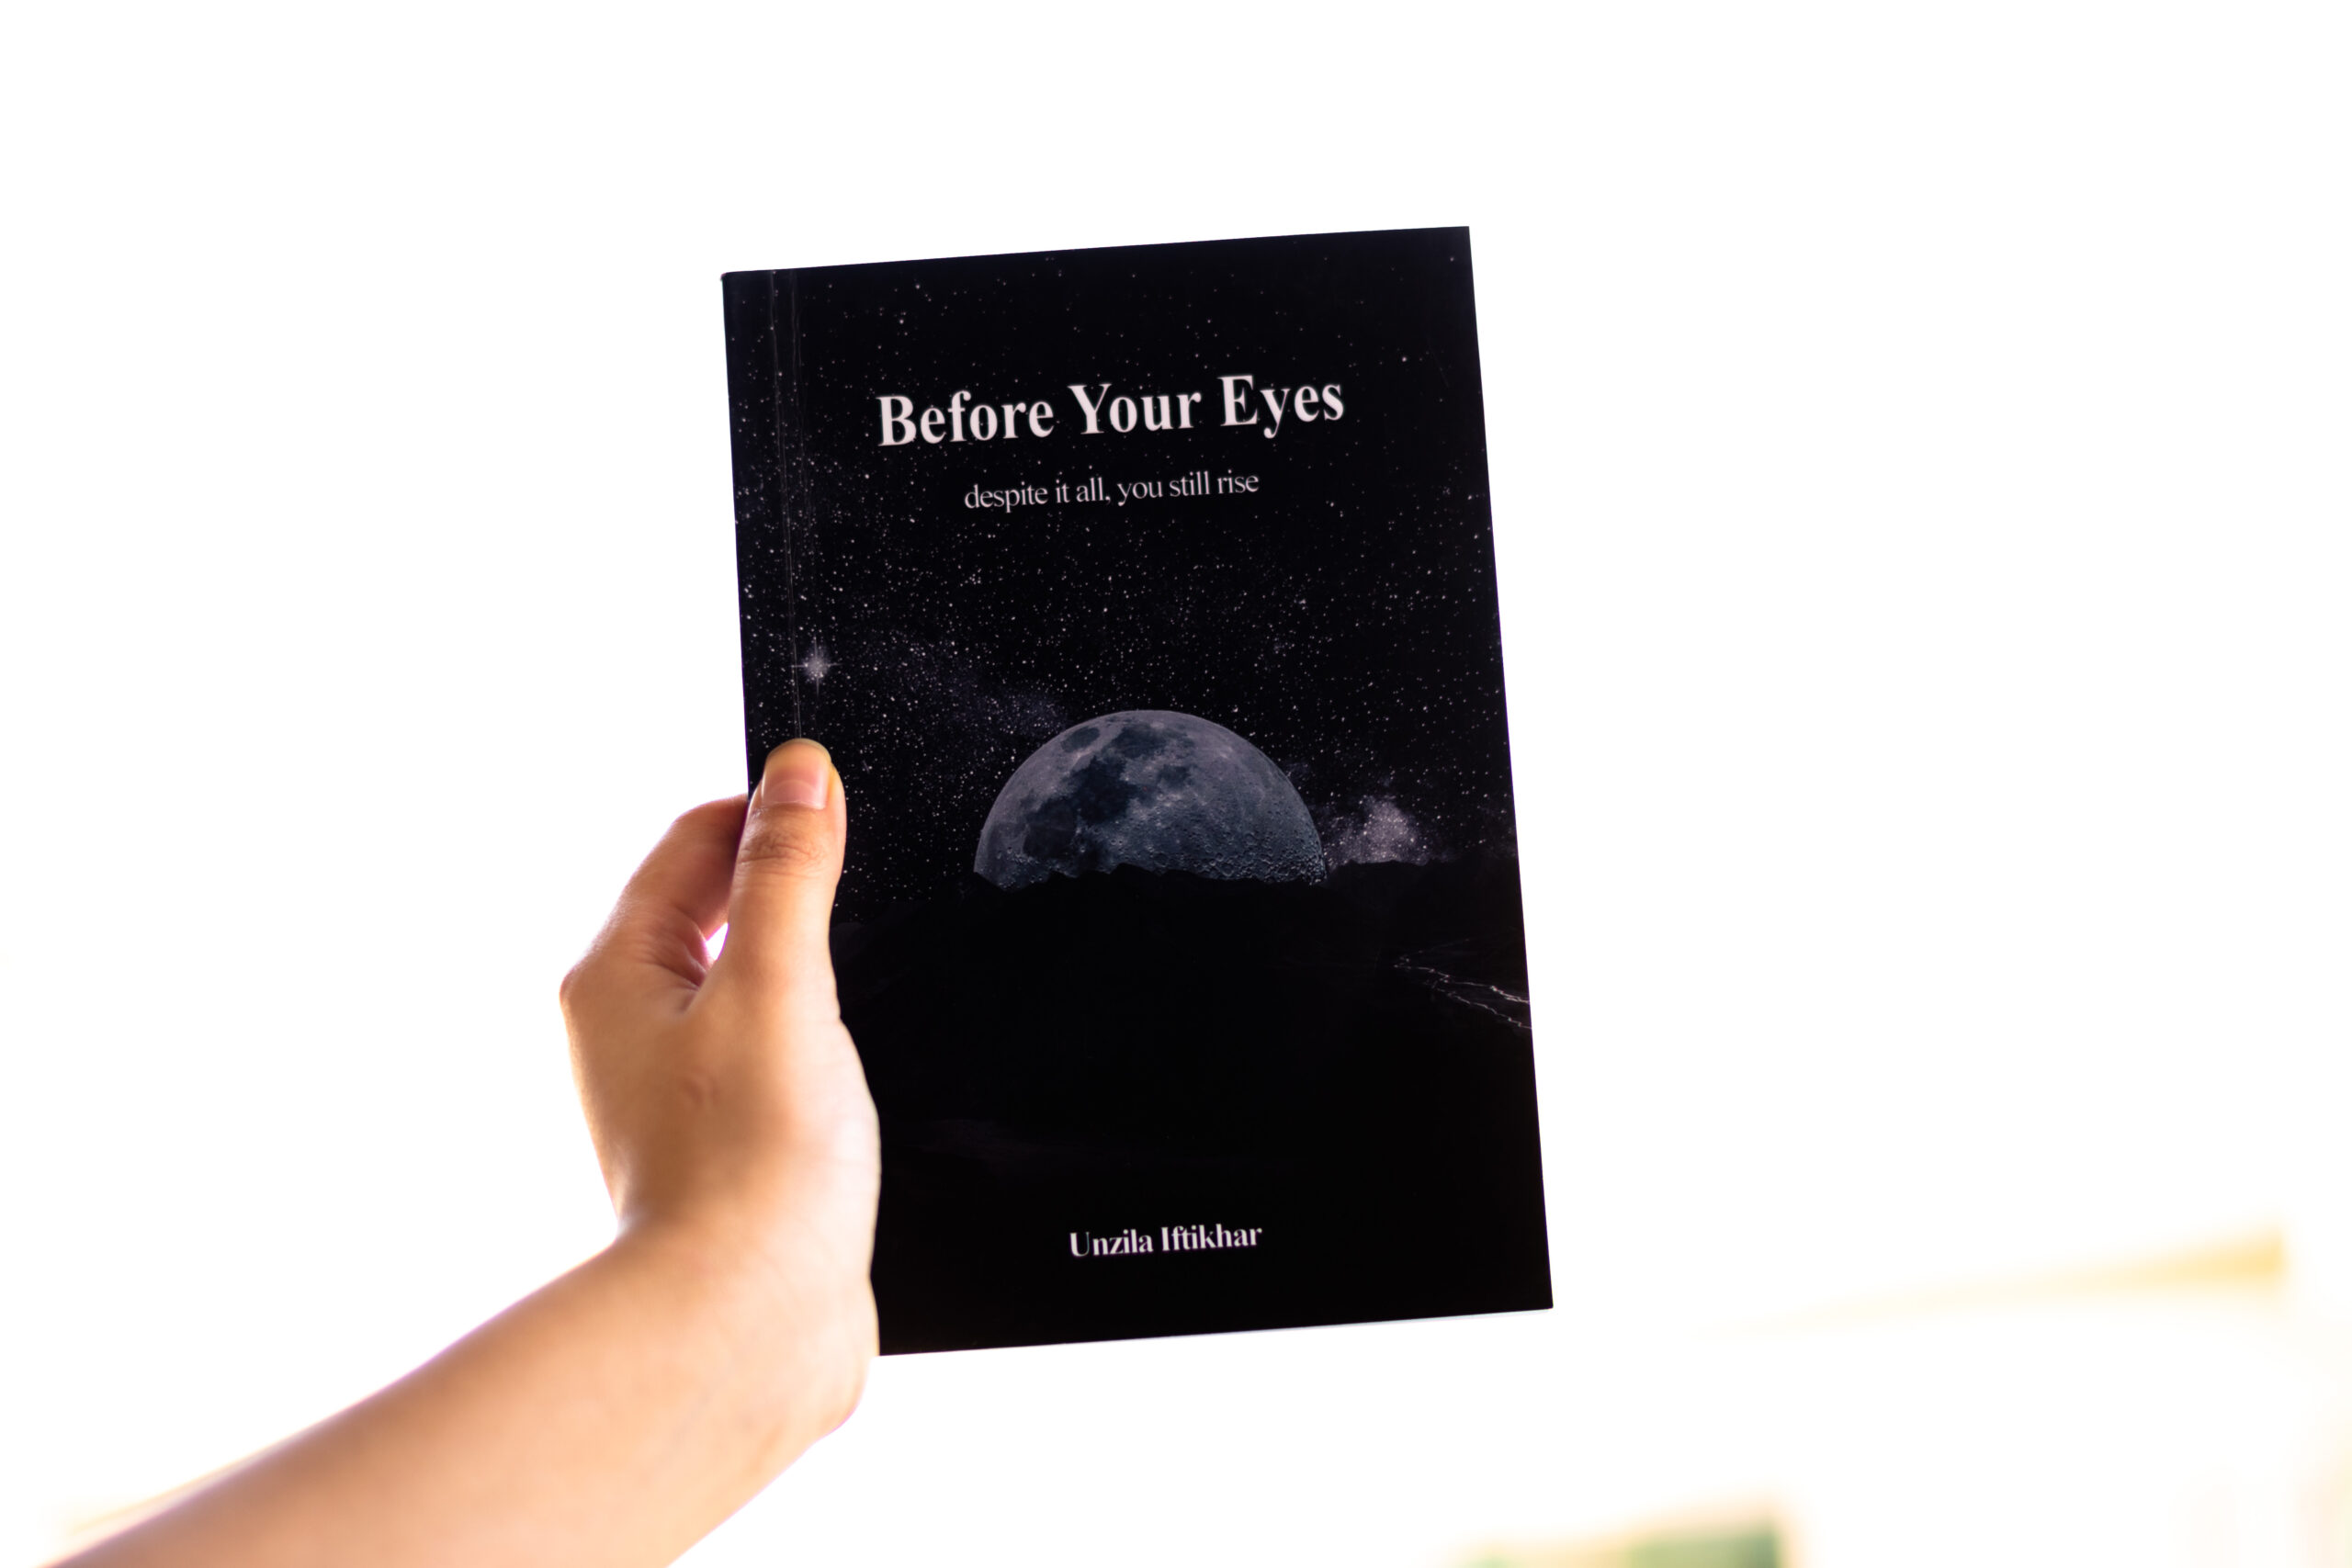 before your eyes